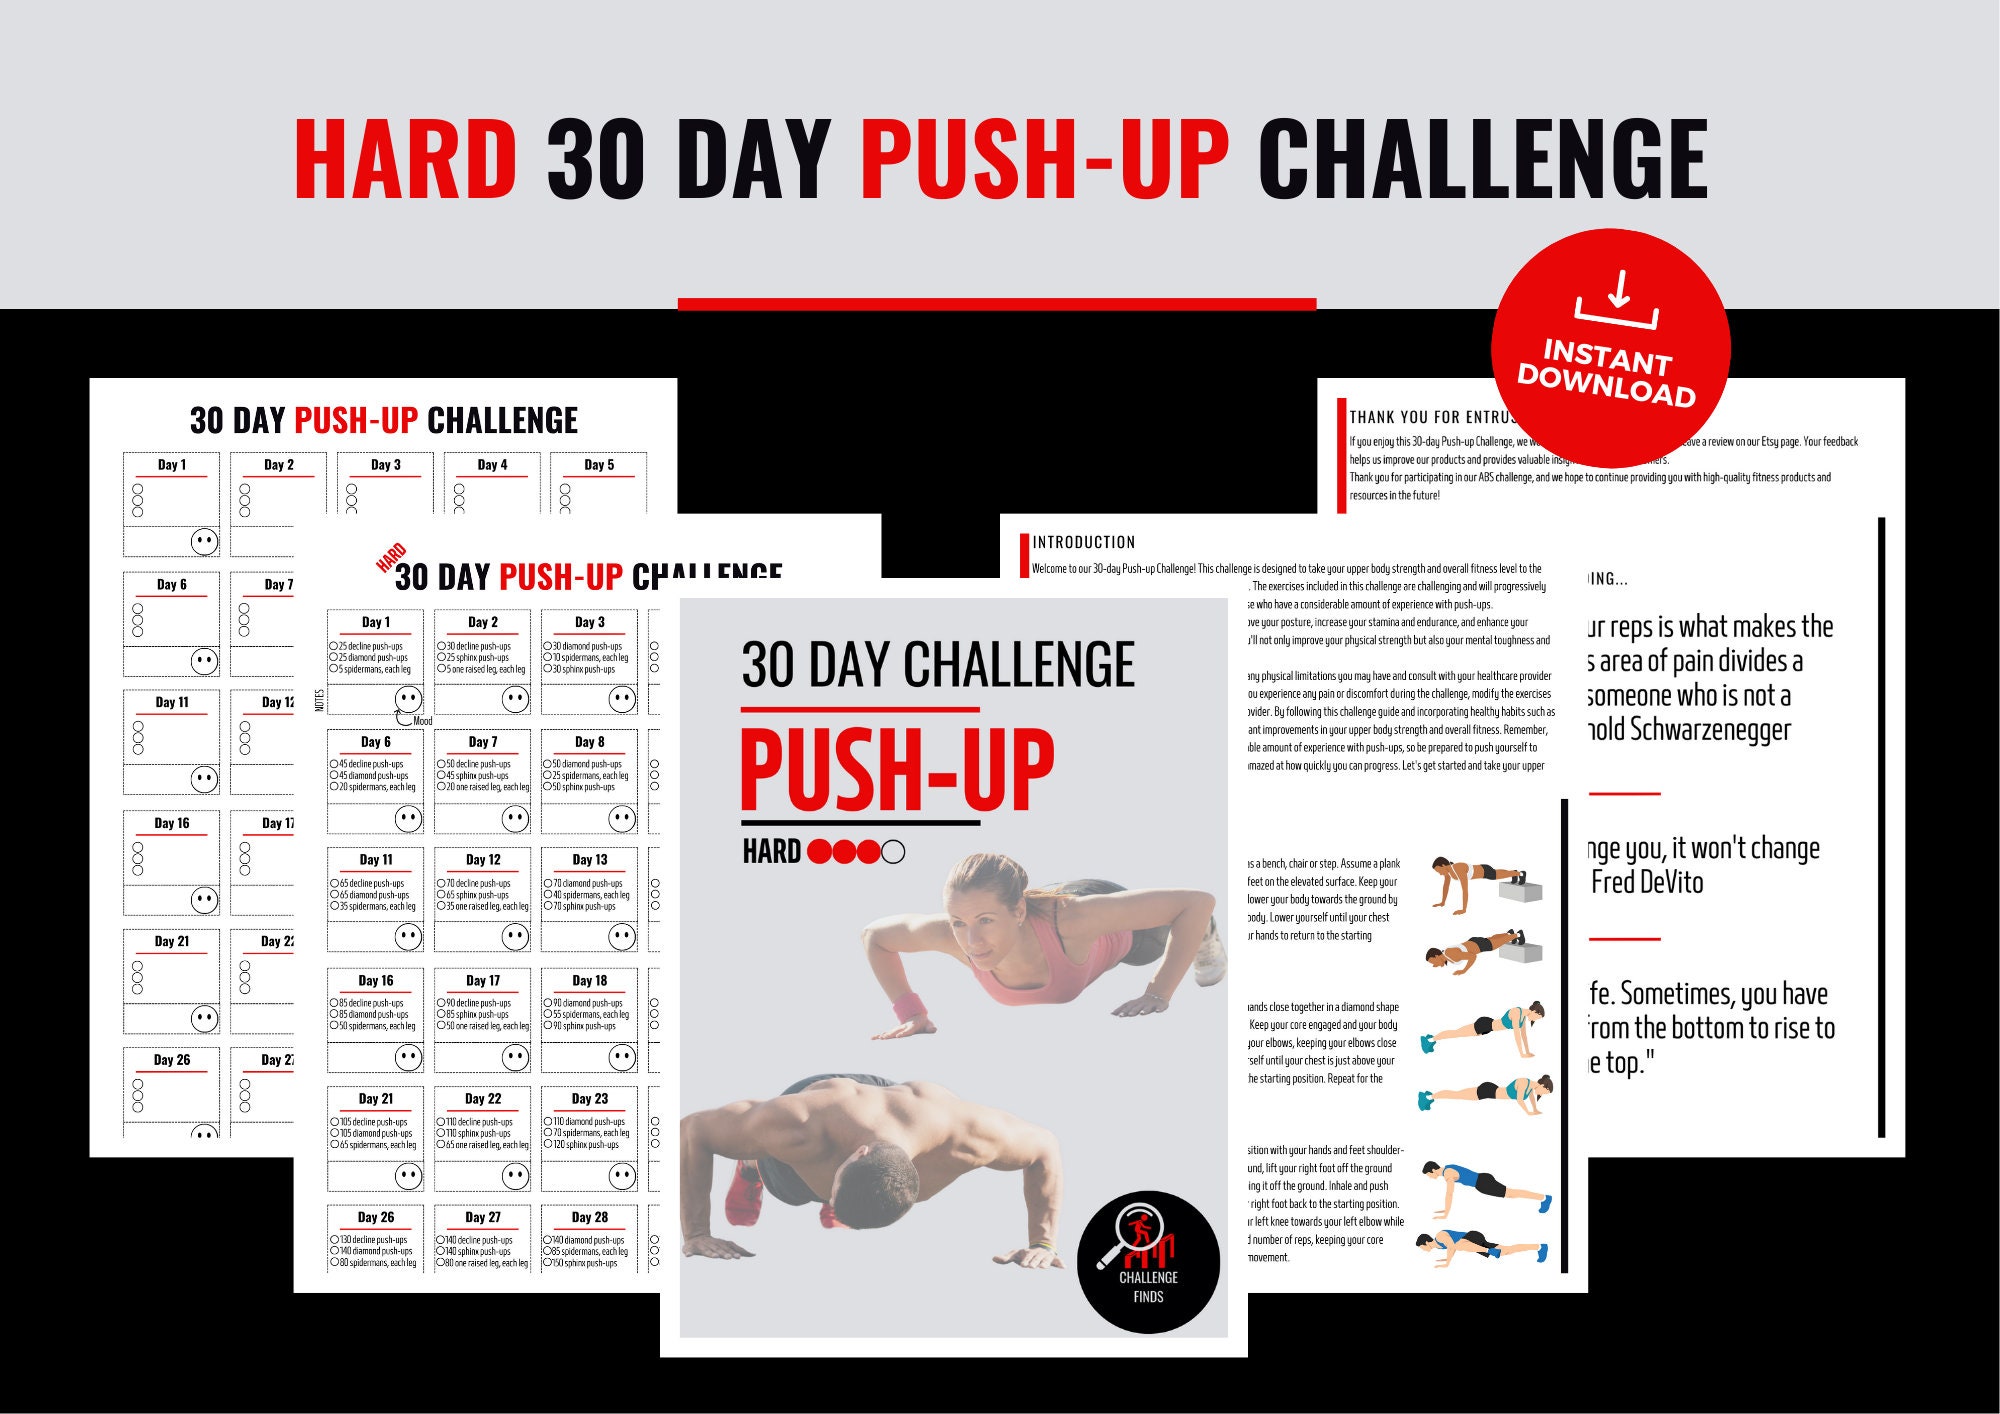 5 Things You Need to Know About the 22 Pushup Challenge - Men's